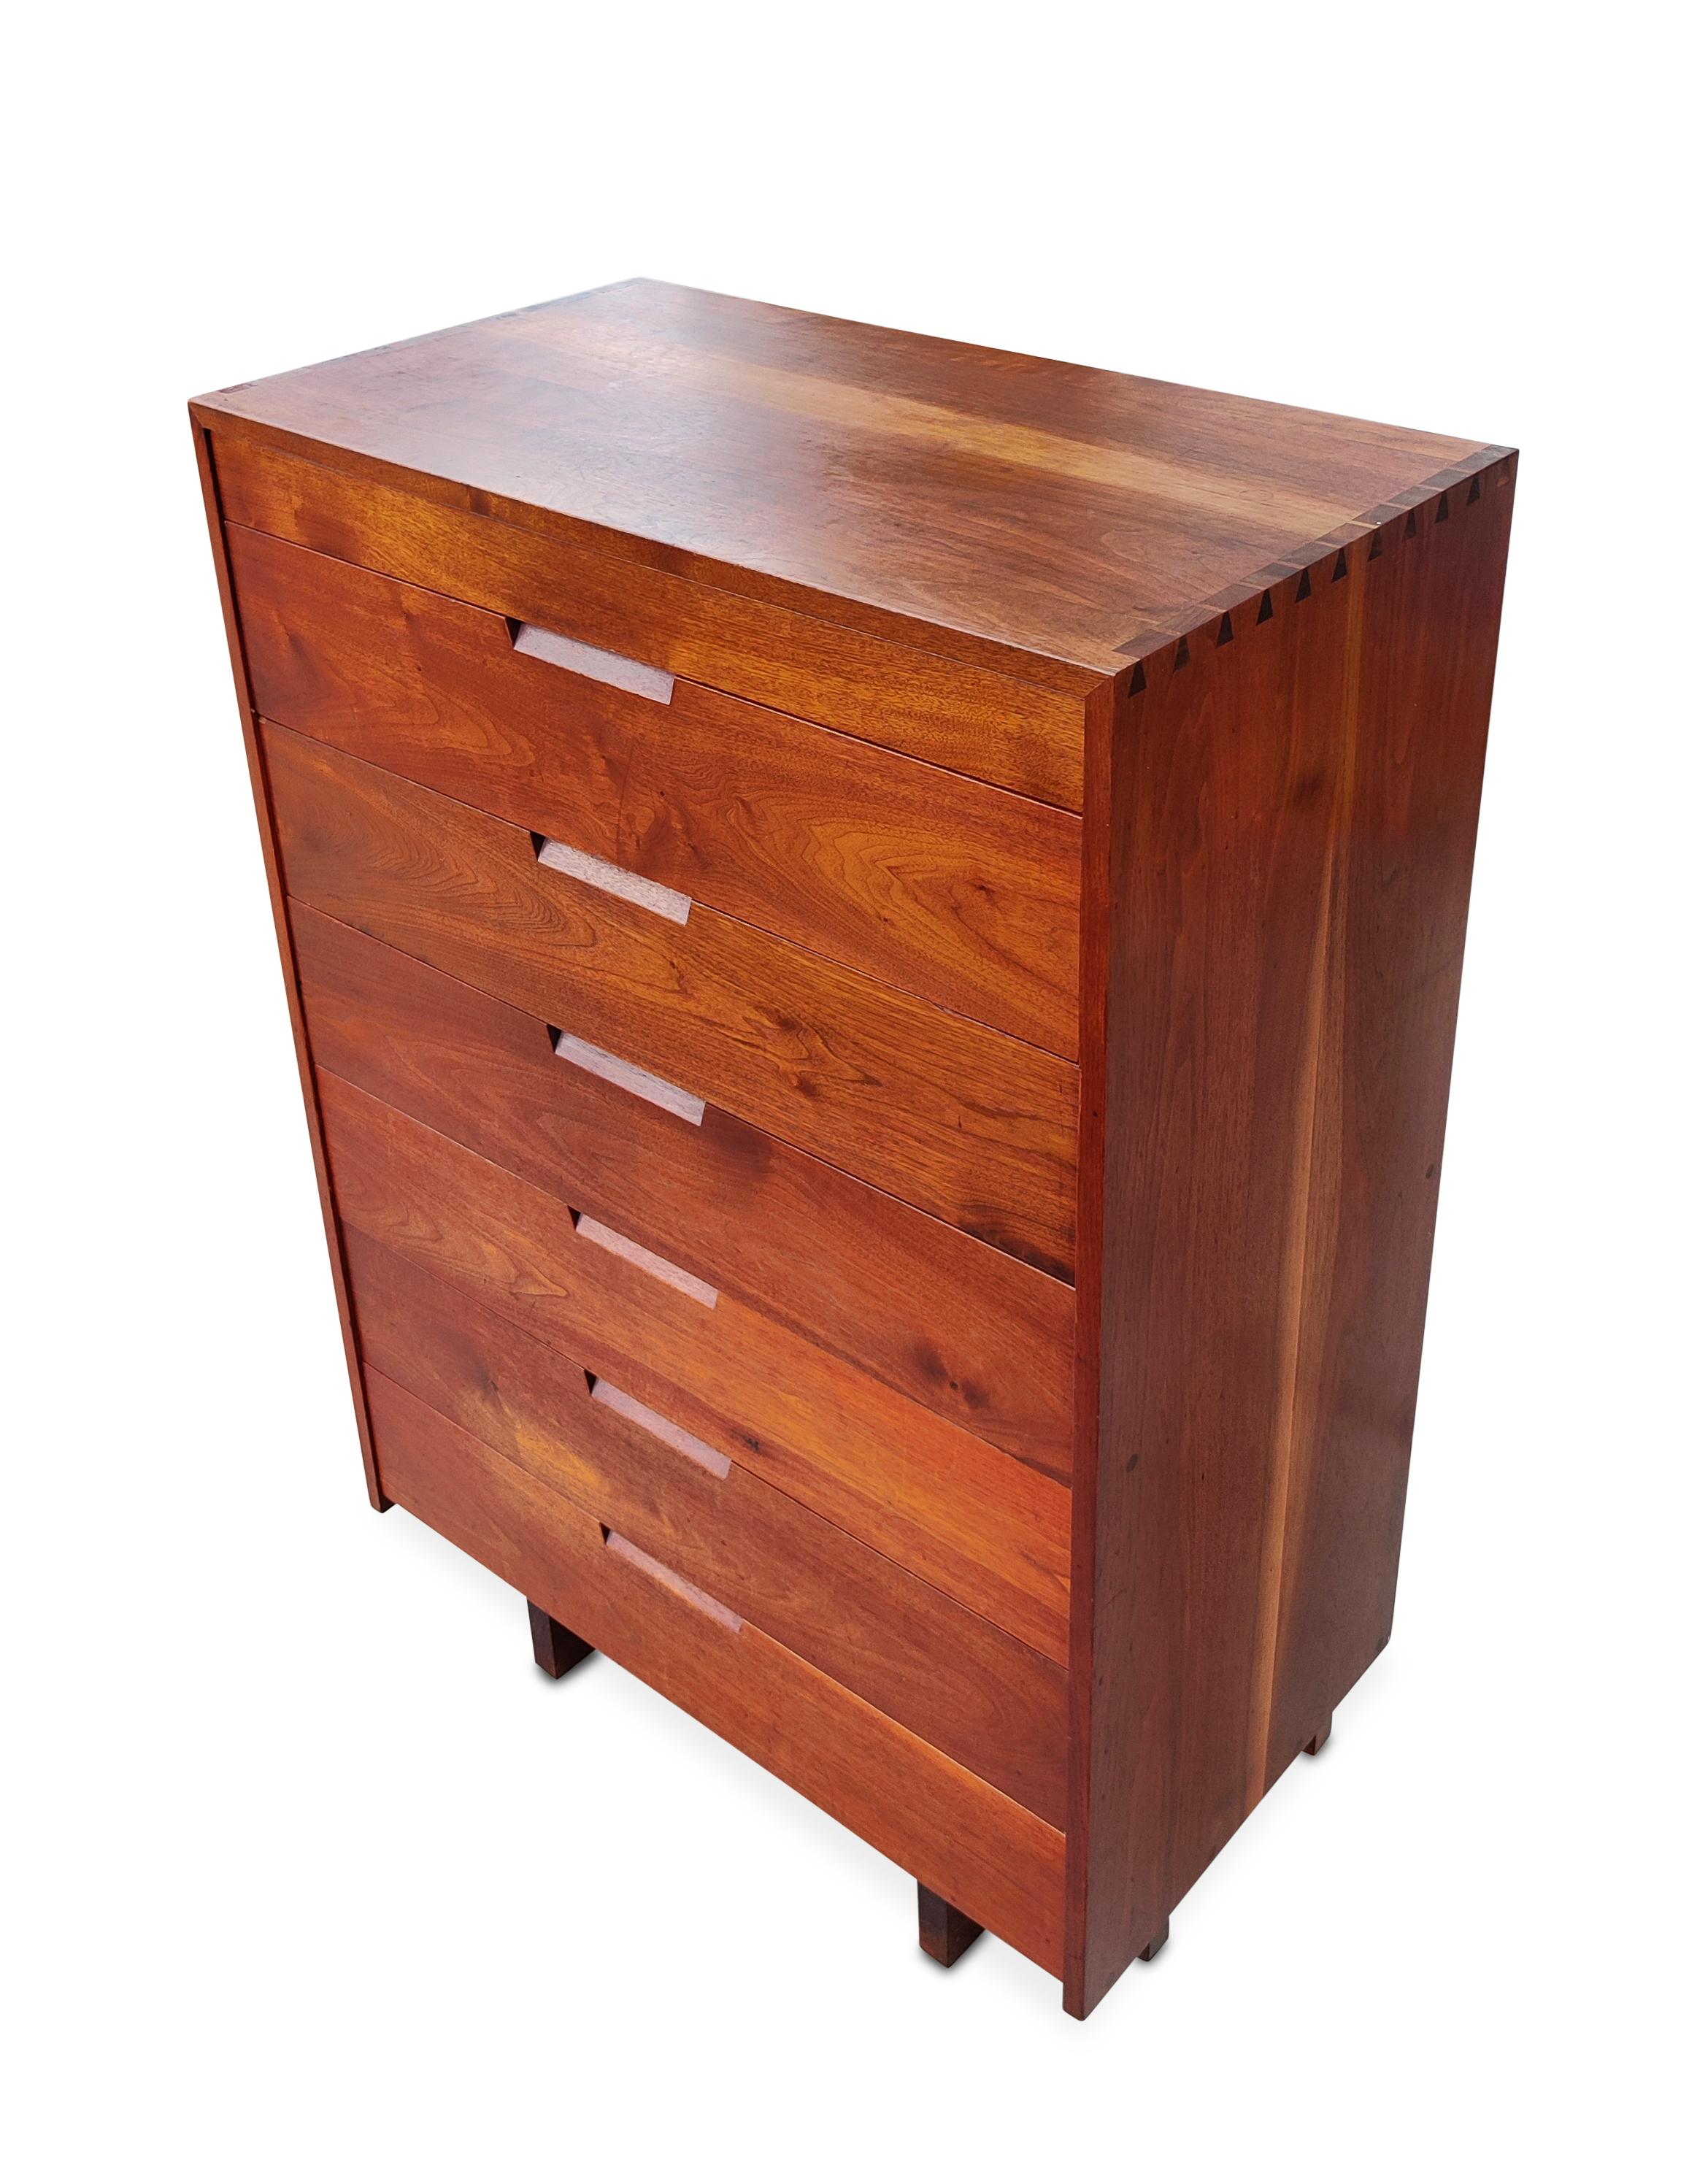 American George Nakashima Black Walnut Chest of Drawers with Dovetail Joinery, USA 1960s